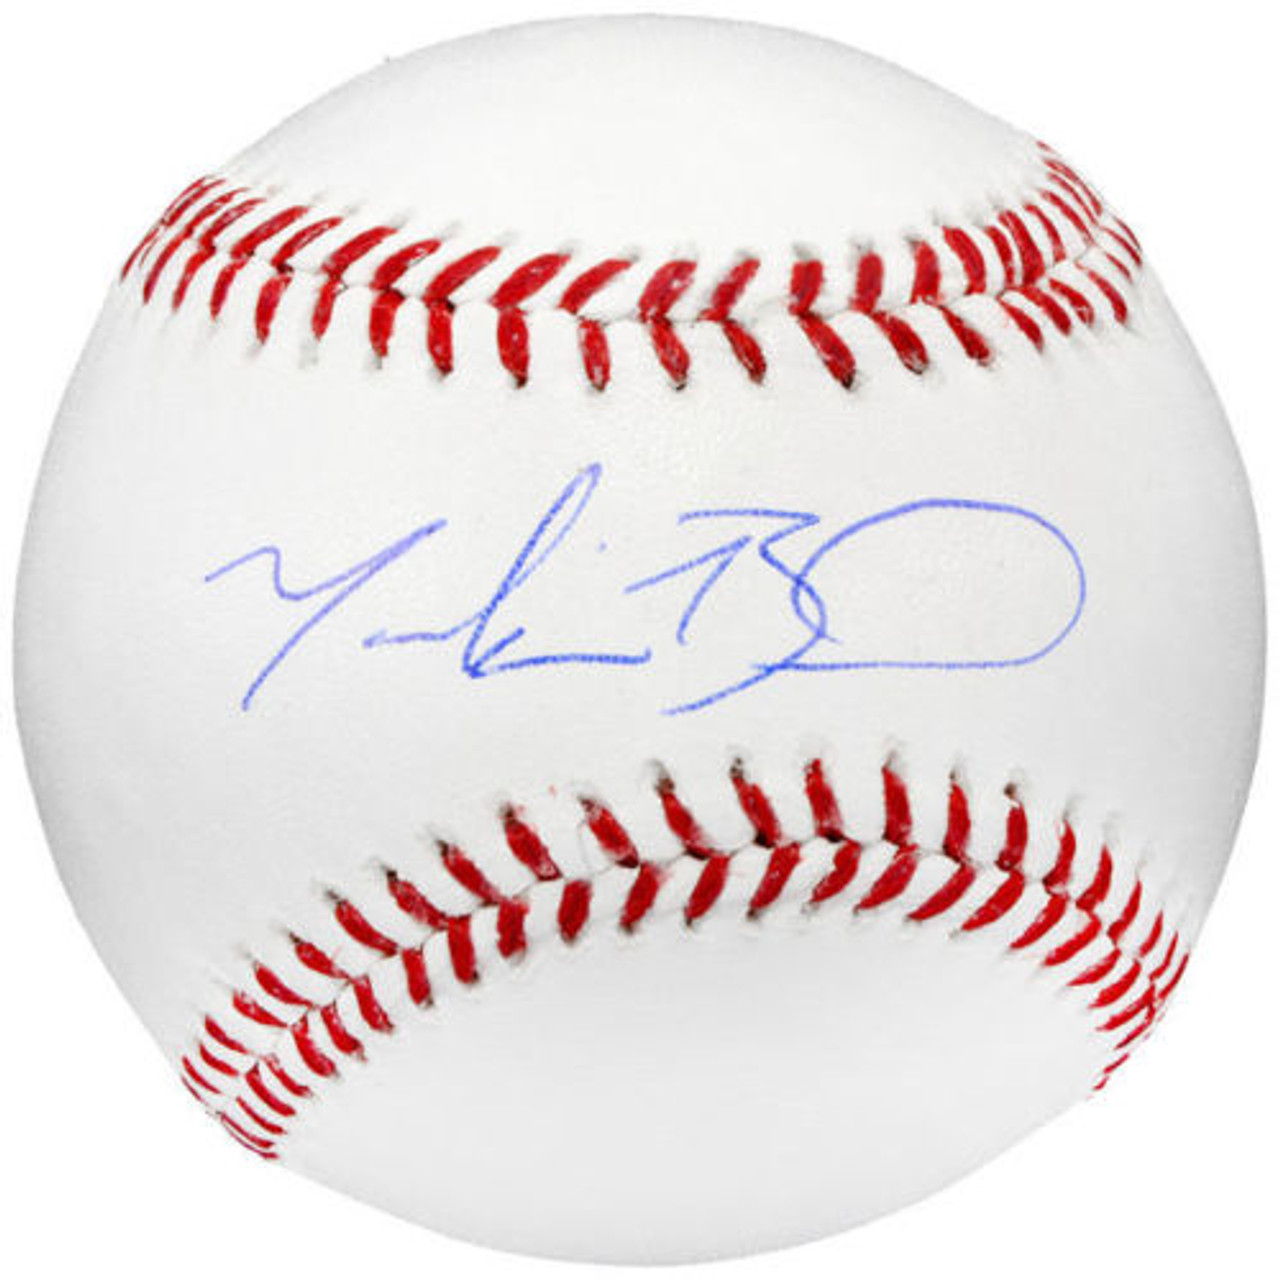 Mookie Betts Signed 2022 All Star Baseball PSA DNA Coa Dodgers Autographed